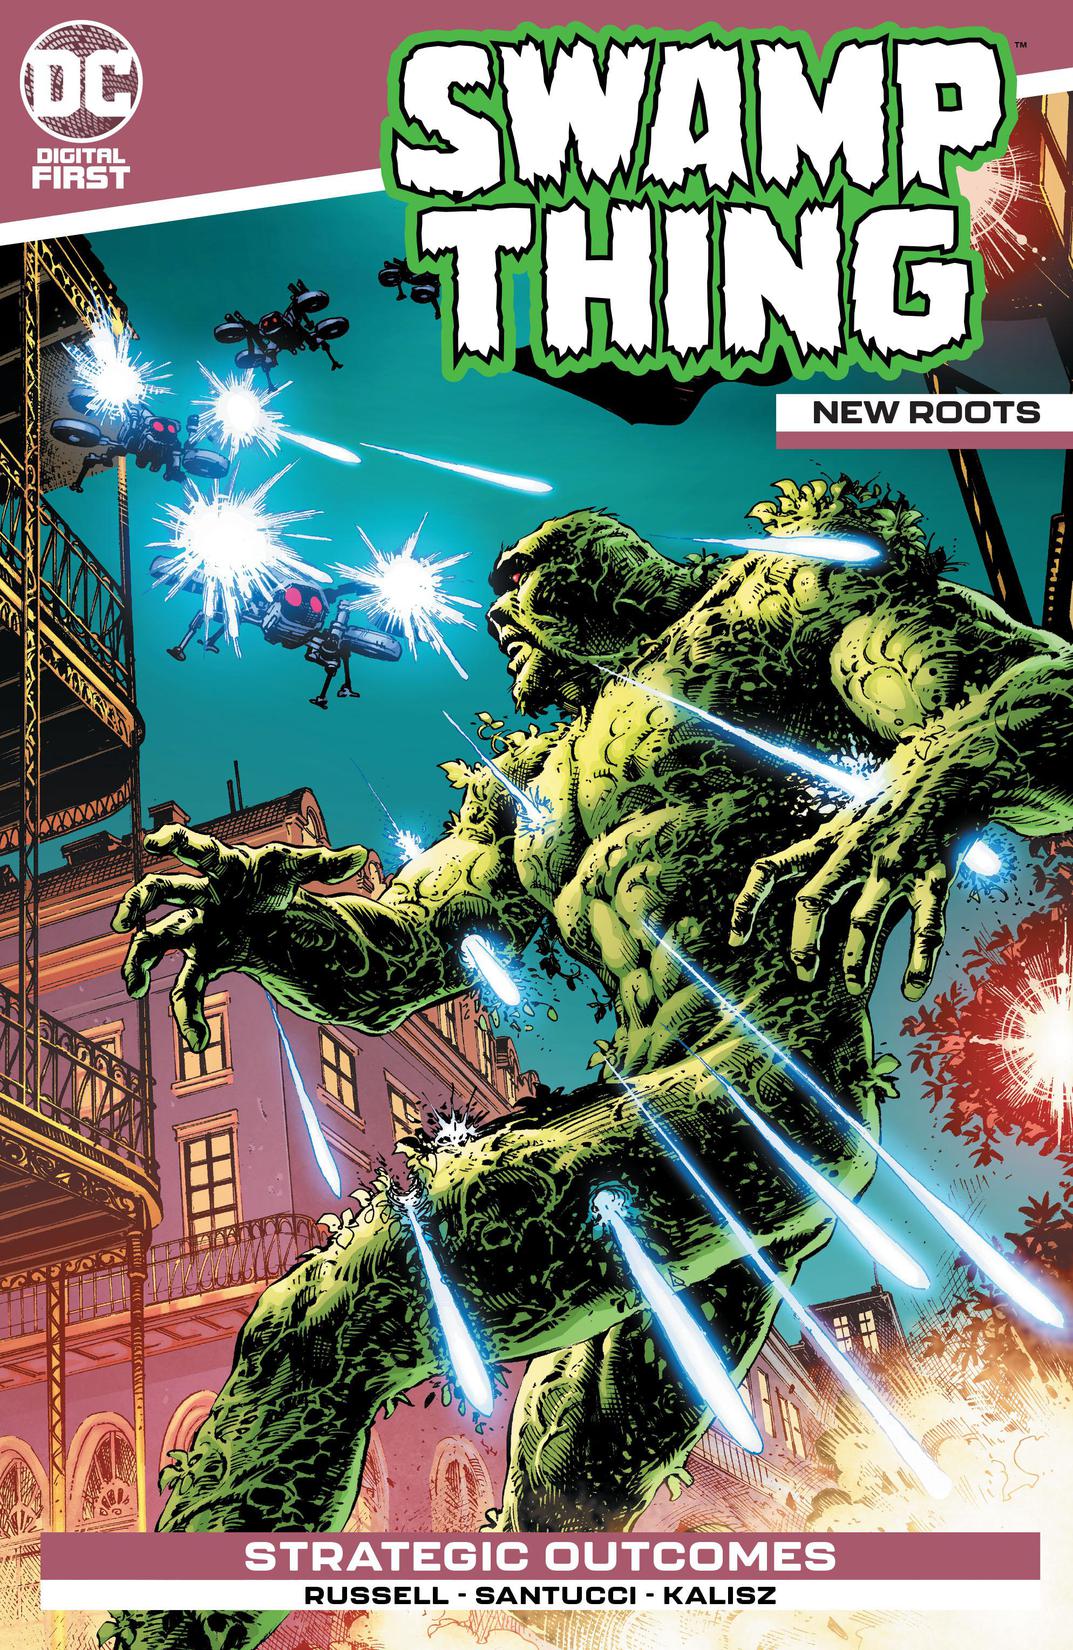 Swamp Thing: New Roots #4 preview images